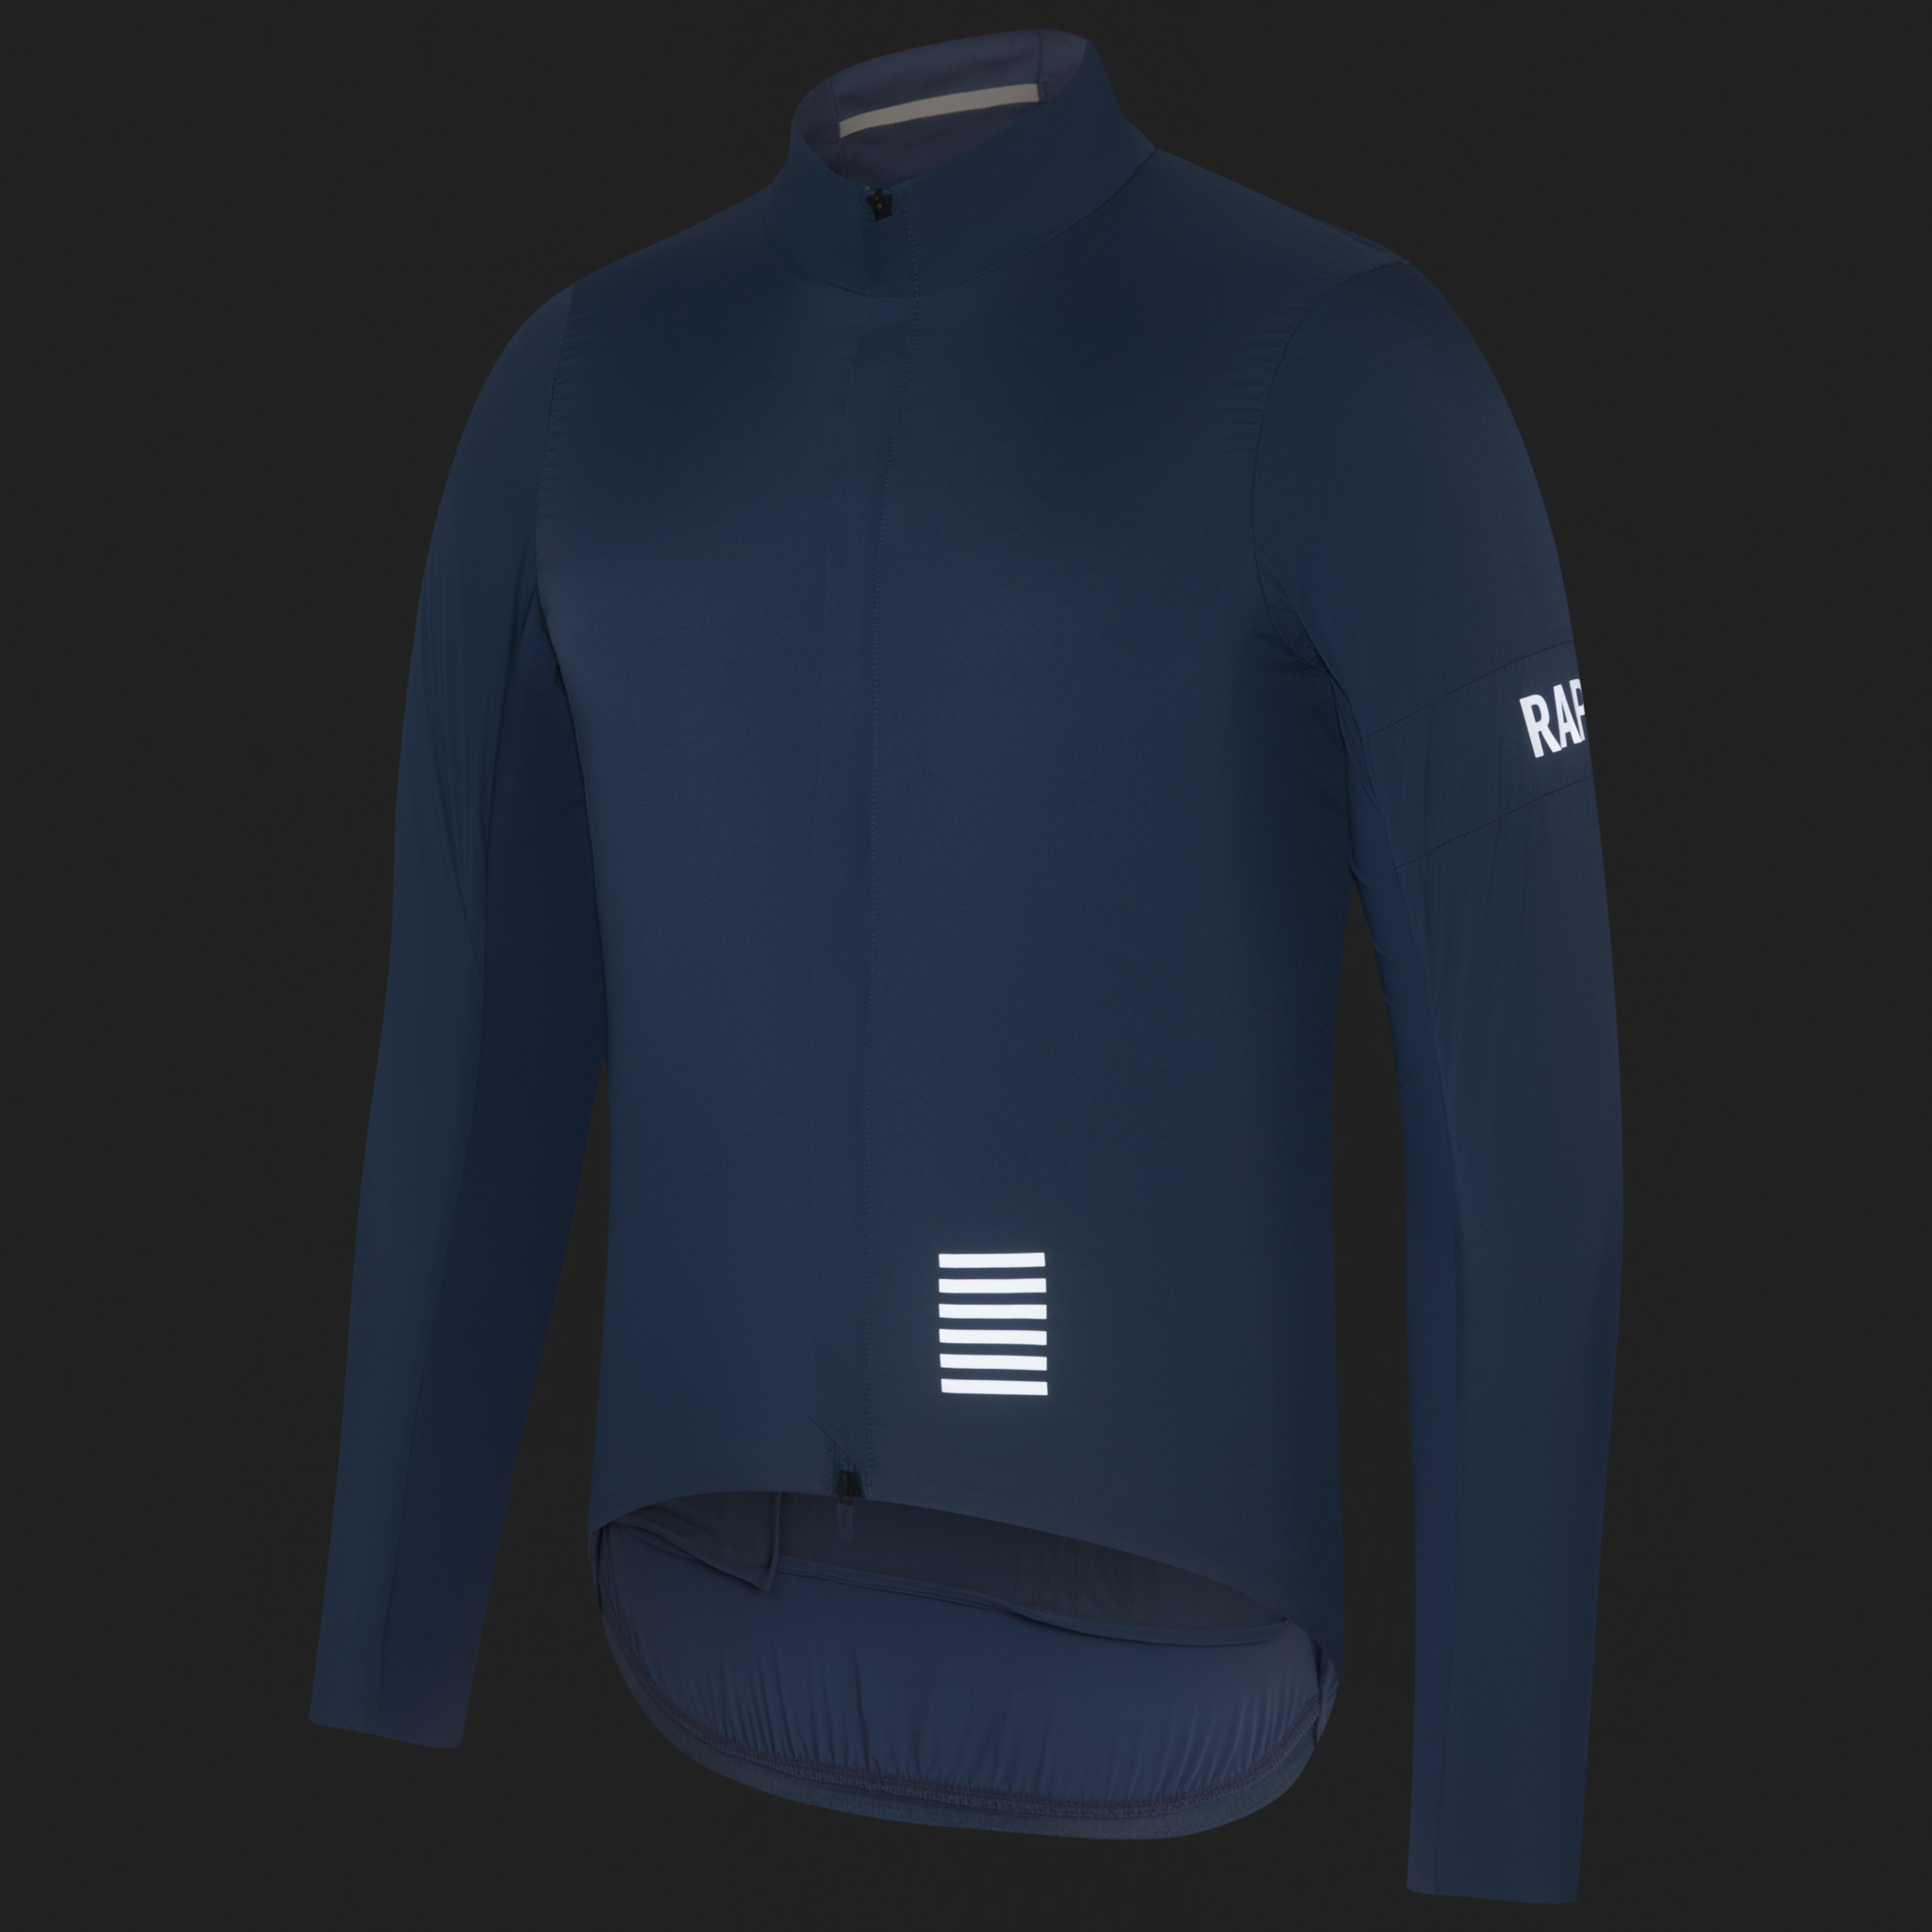 Men's Pro Team Insulated Cycling Jacket for Winter | Rapha